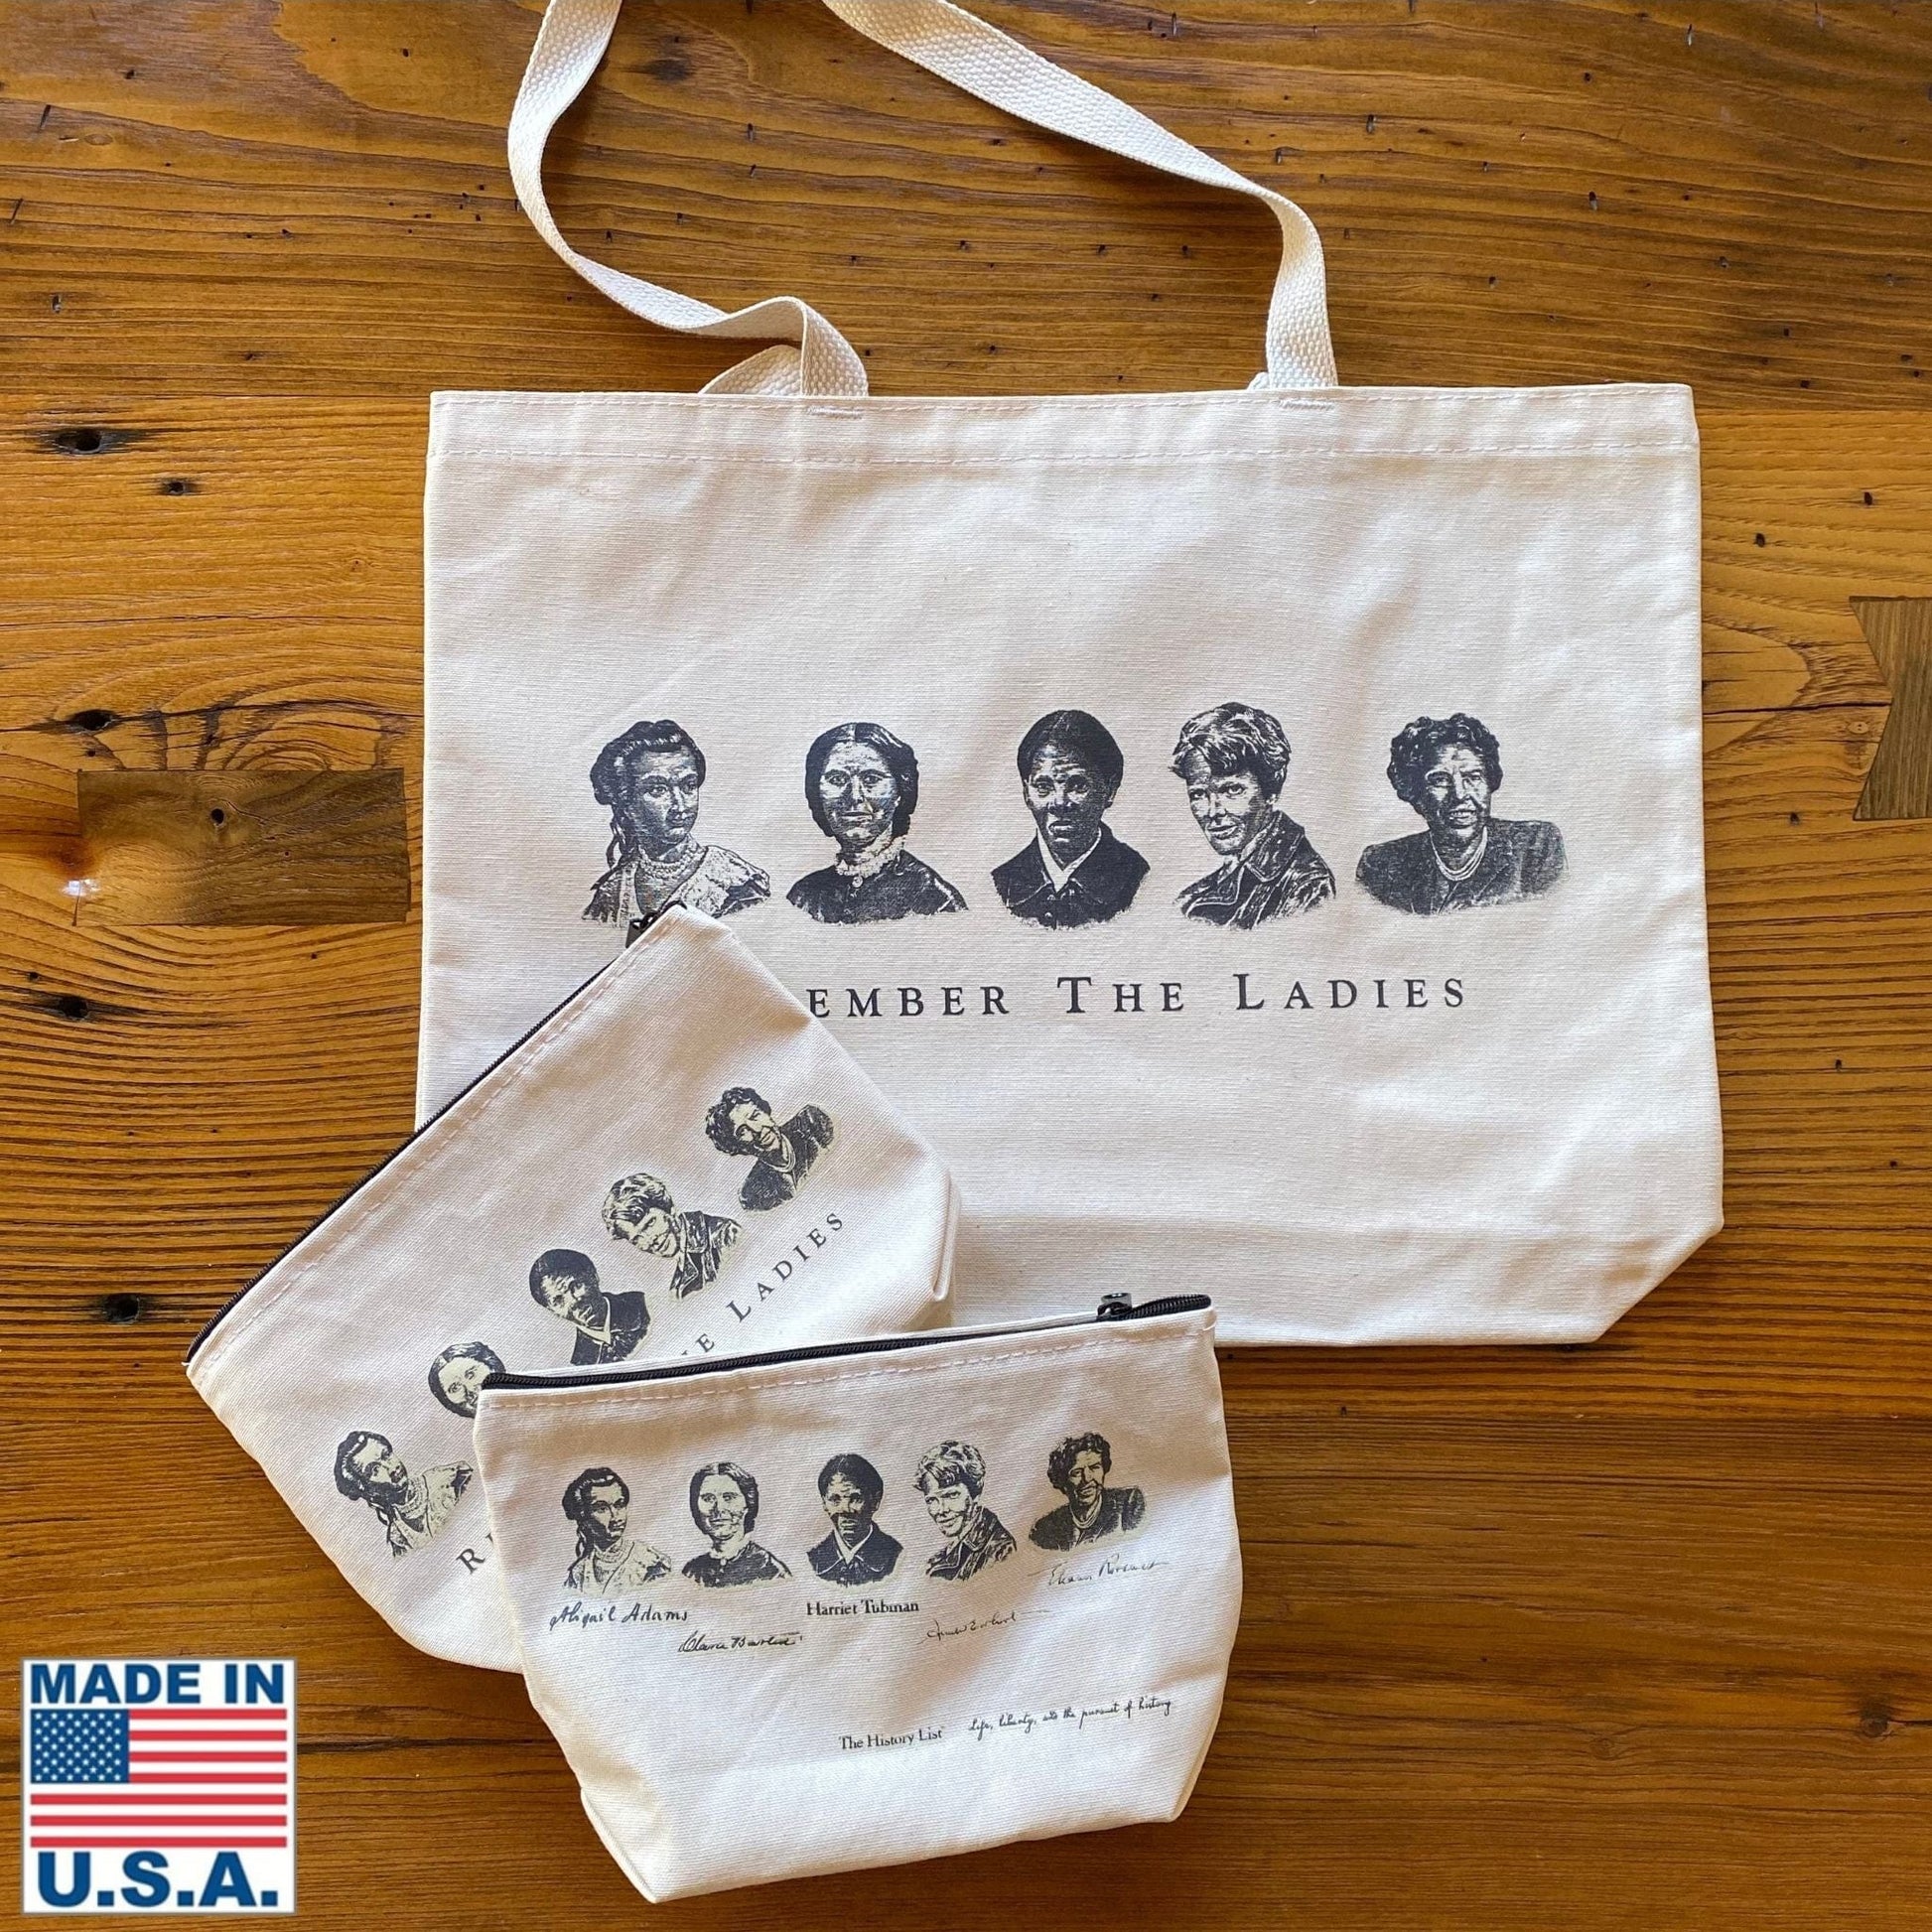 "Remember the Ladies" tote and small canvas bag from the history list store